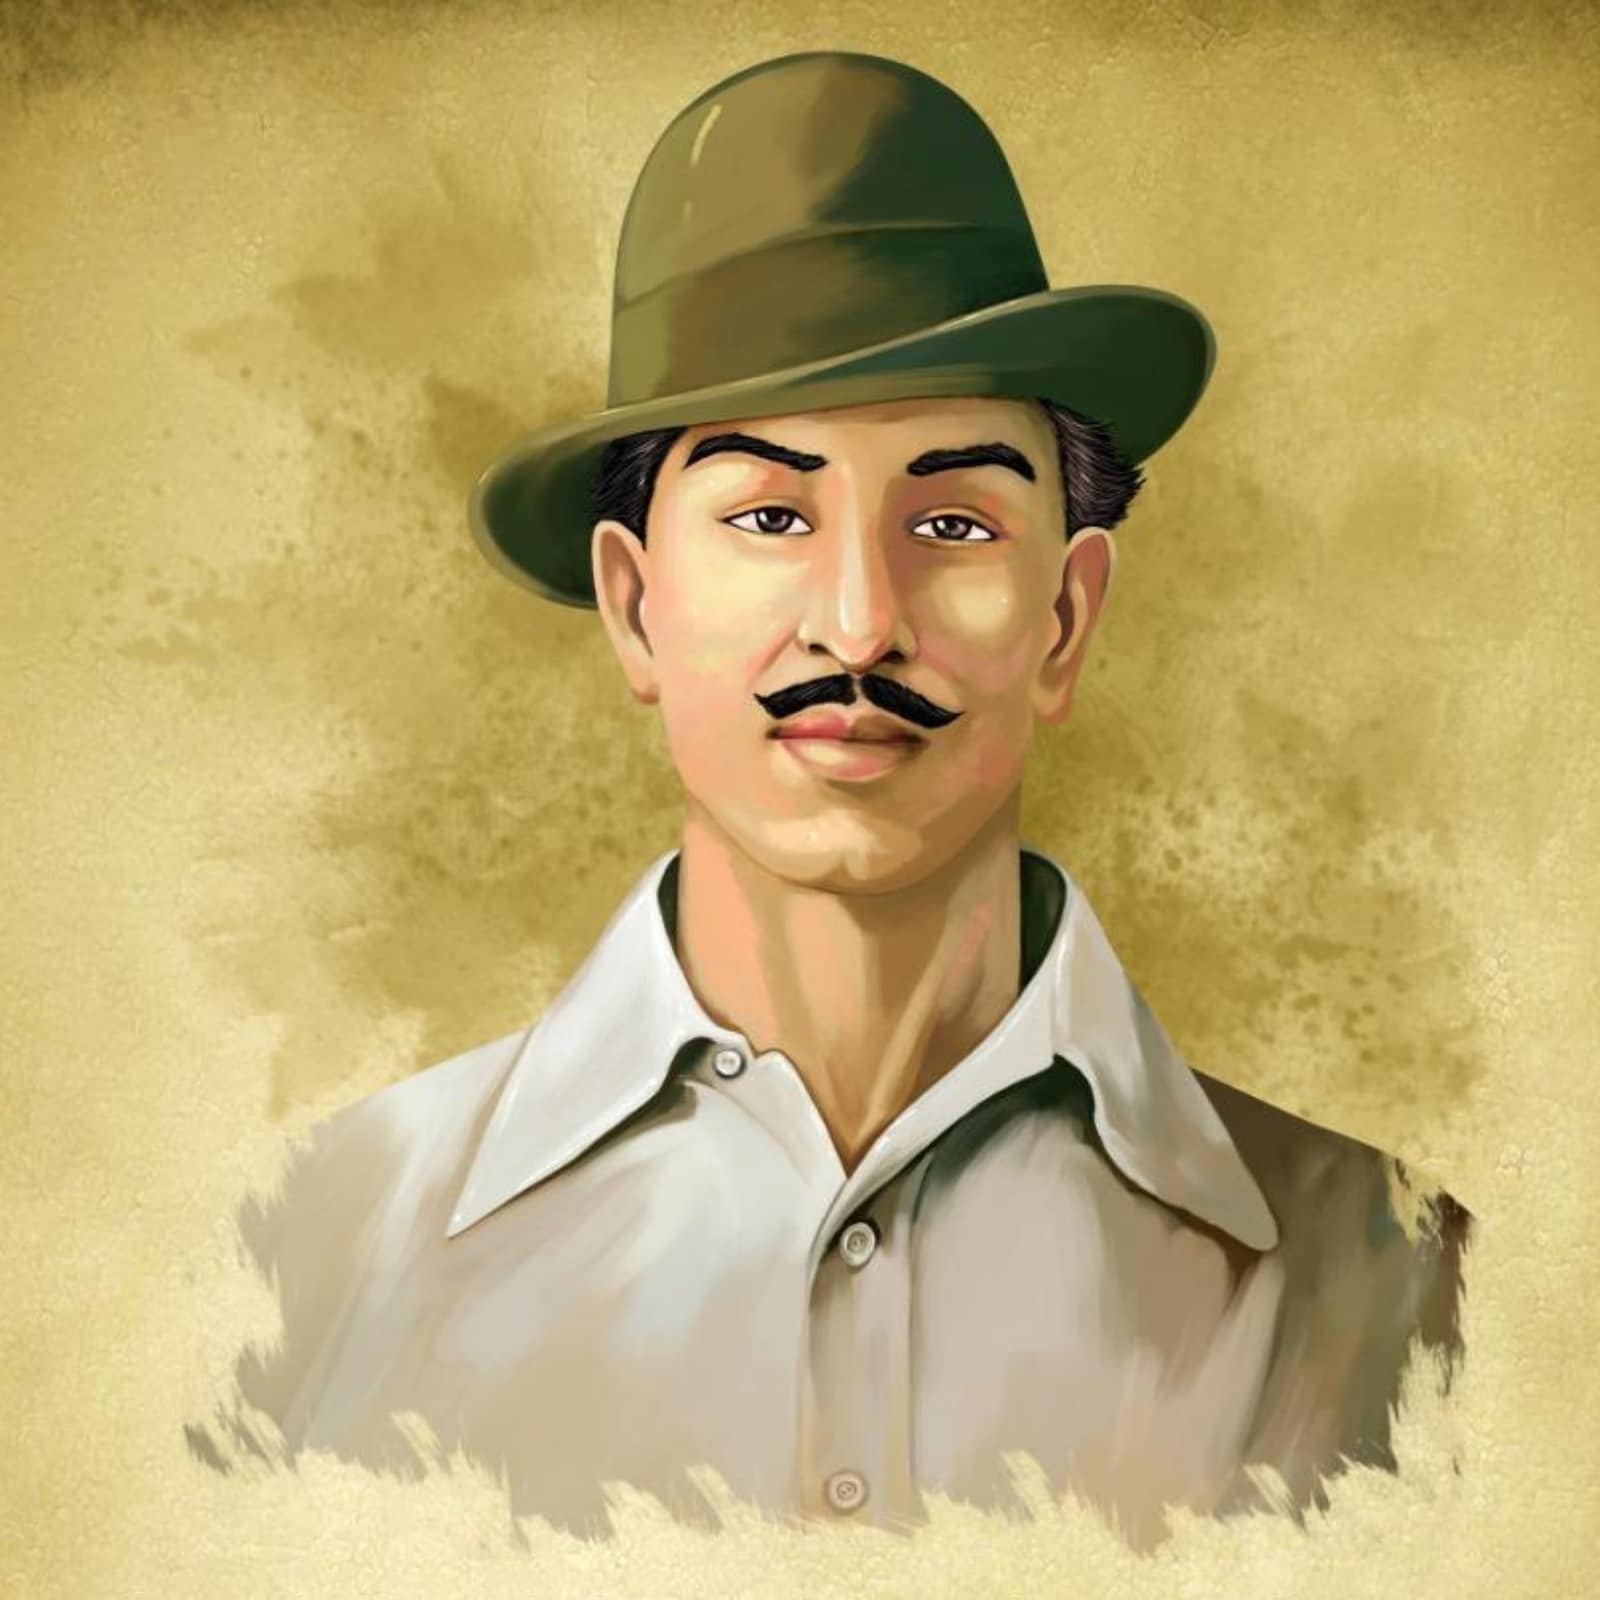 Martyrs' Day 2022: 7 Movies Based on the Life of 'Shaheed' Bhagat Singh